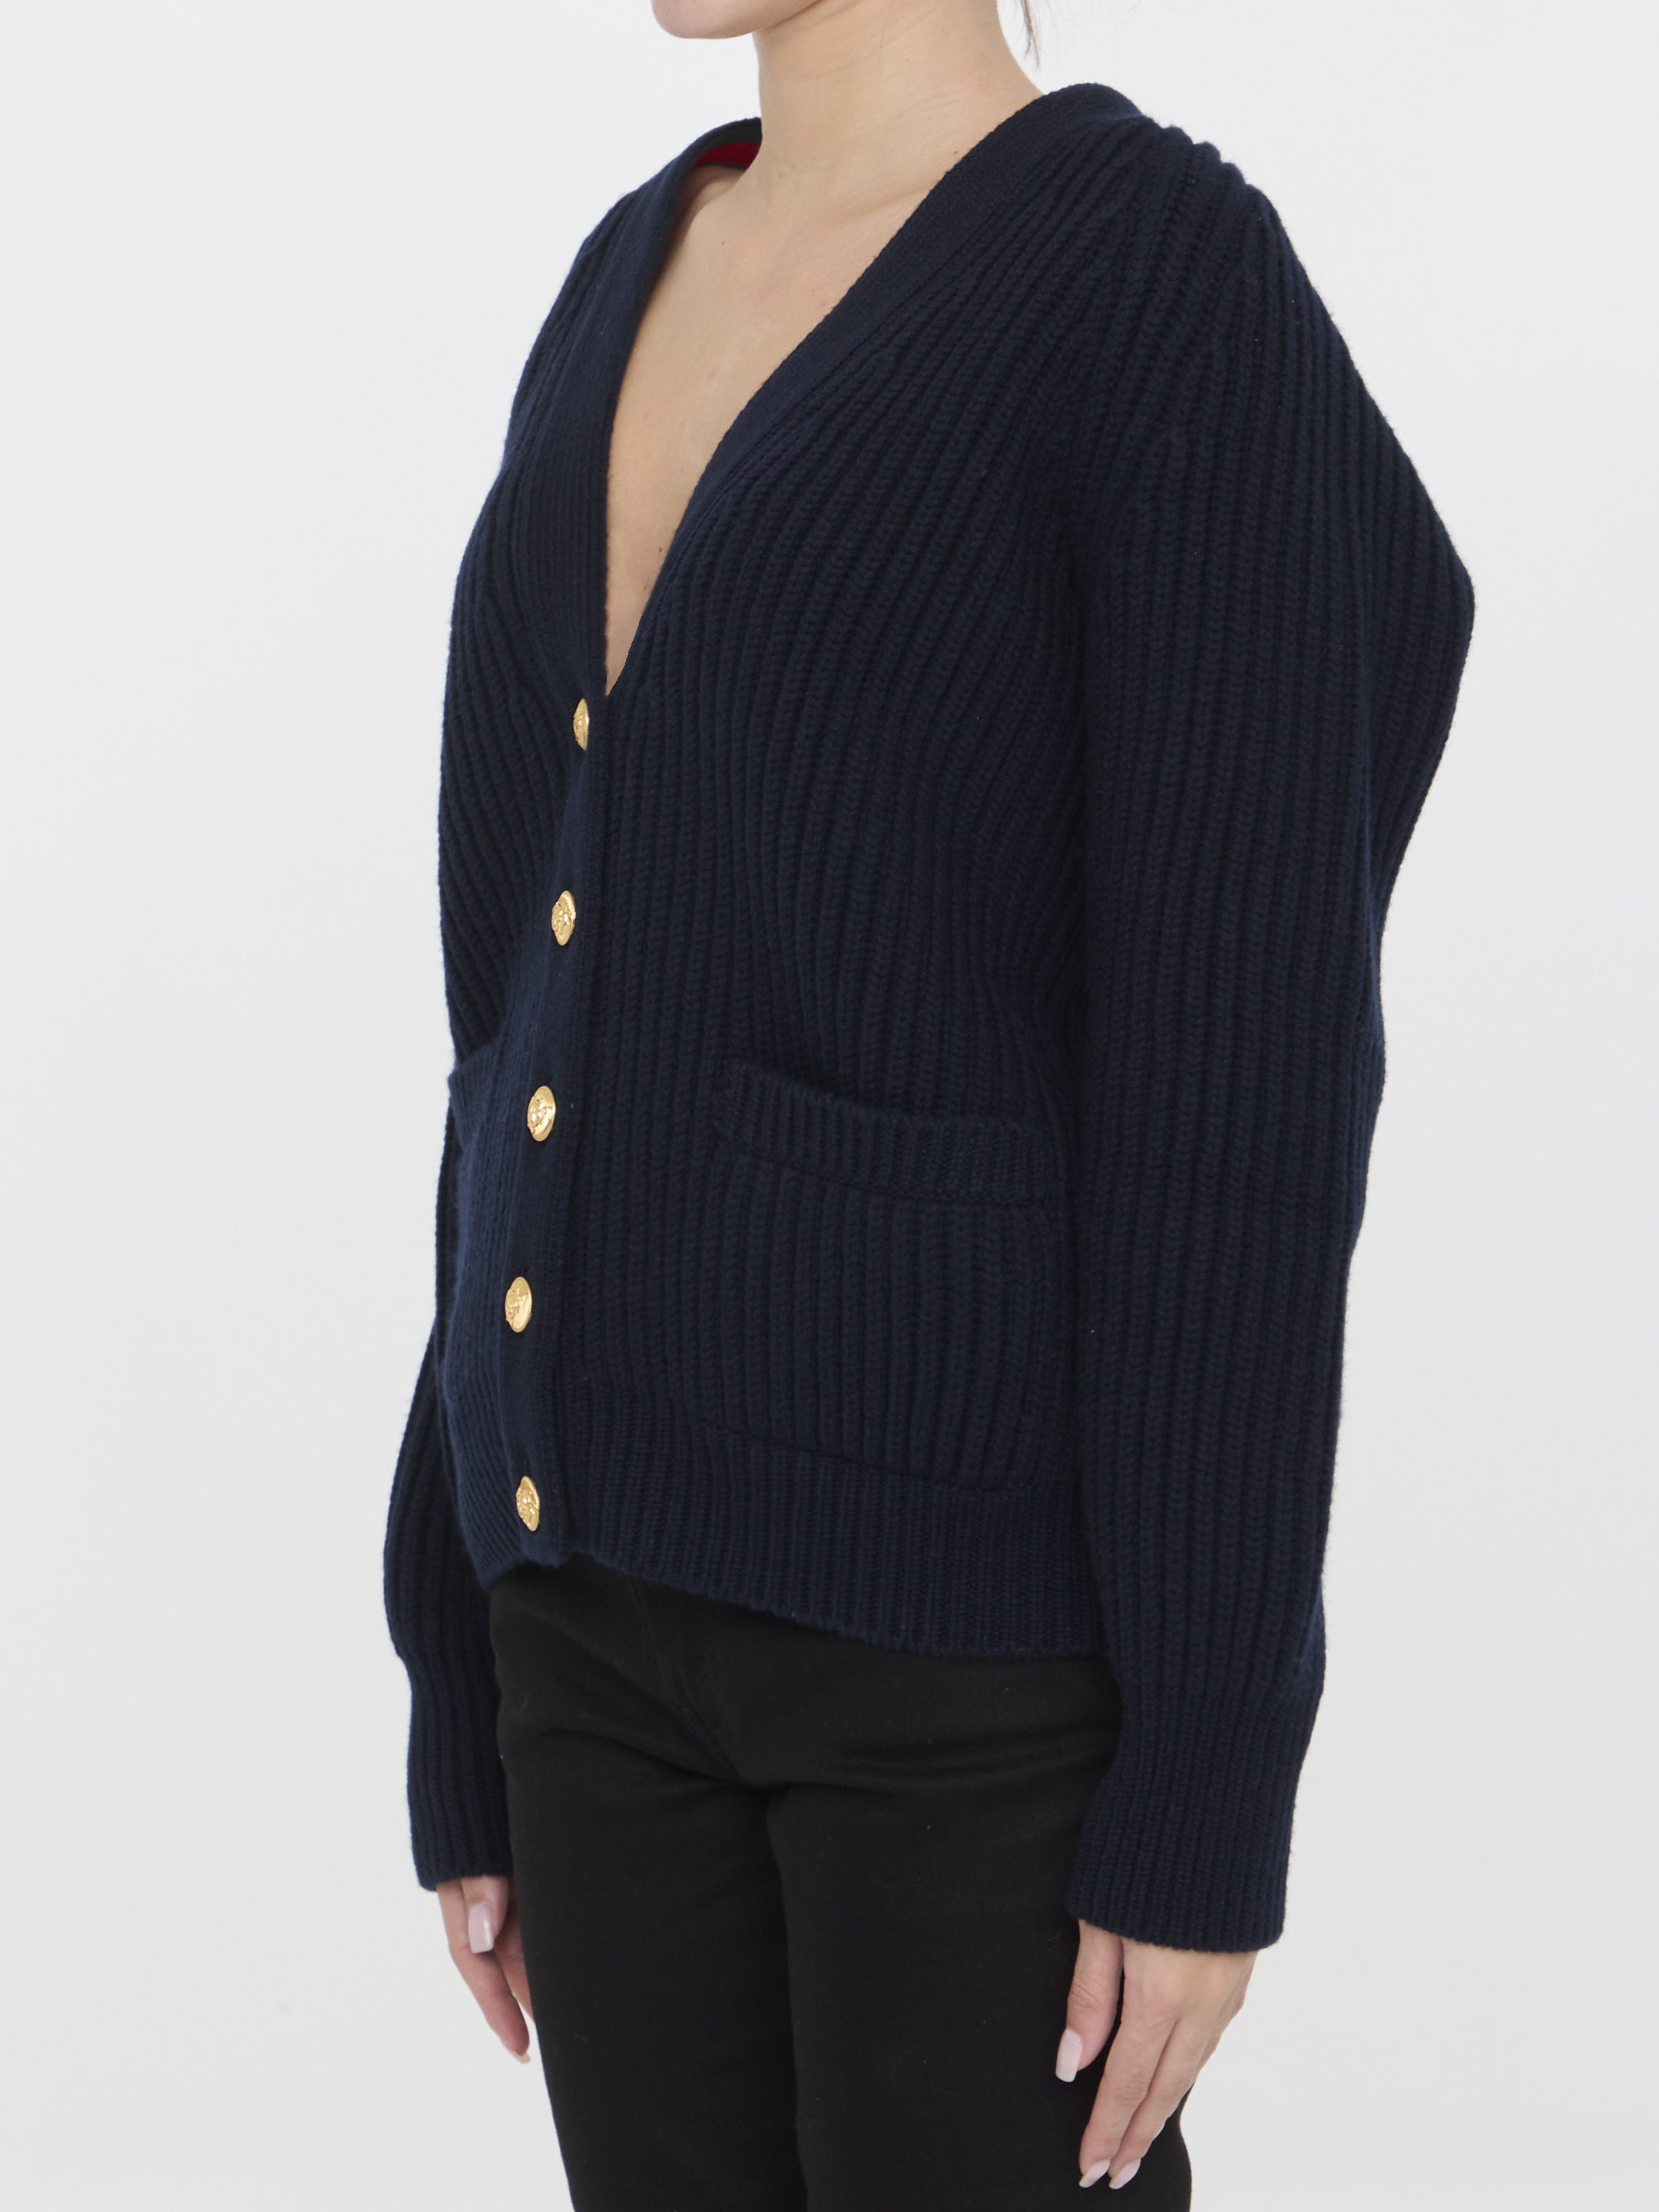 GUCCI-OUTLET-SALE-Ribbed-cardigan-Strick-ARCHIVE-COLLECTION-2.jpg